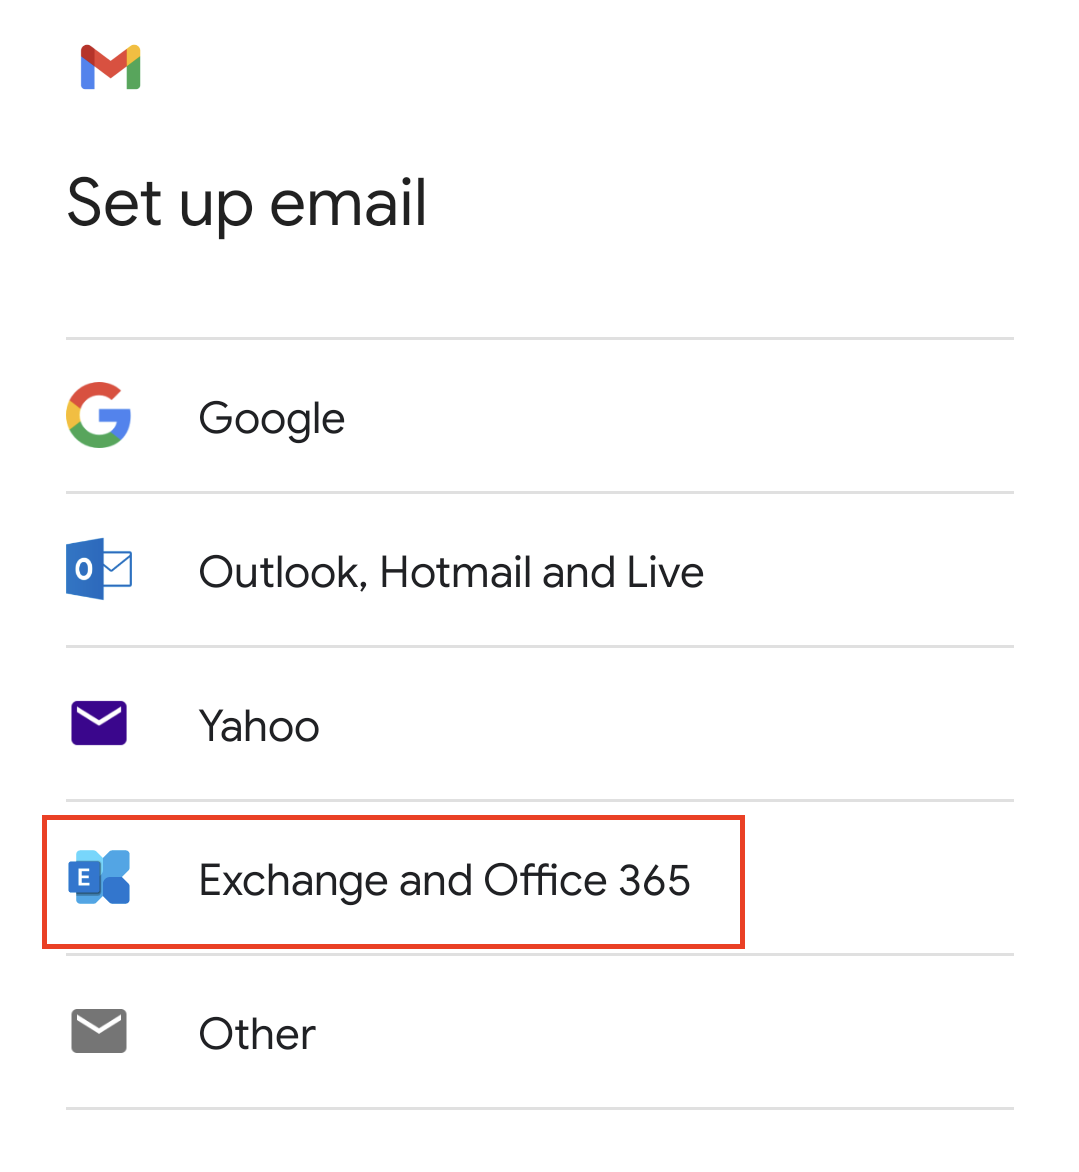 Explanatory screenshot to the previous description with marker on "Exchange and Office 365"